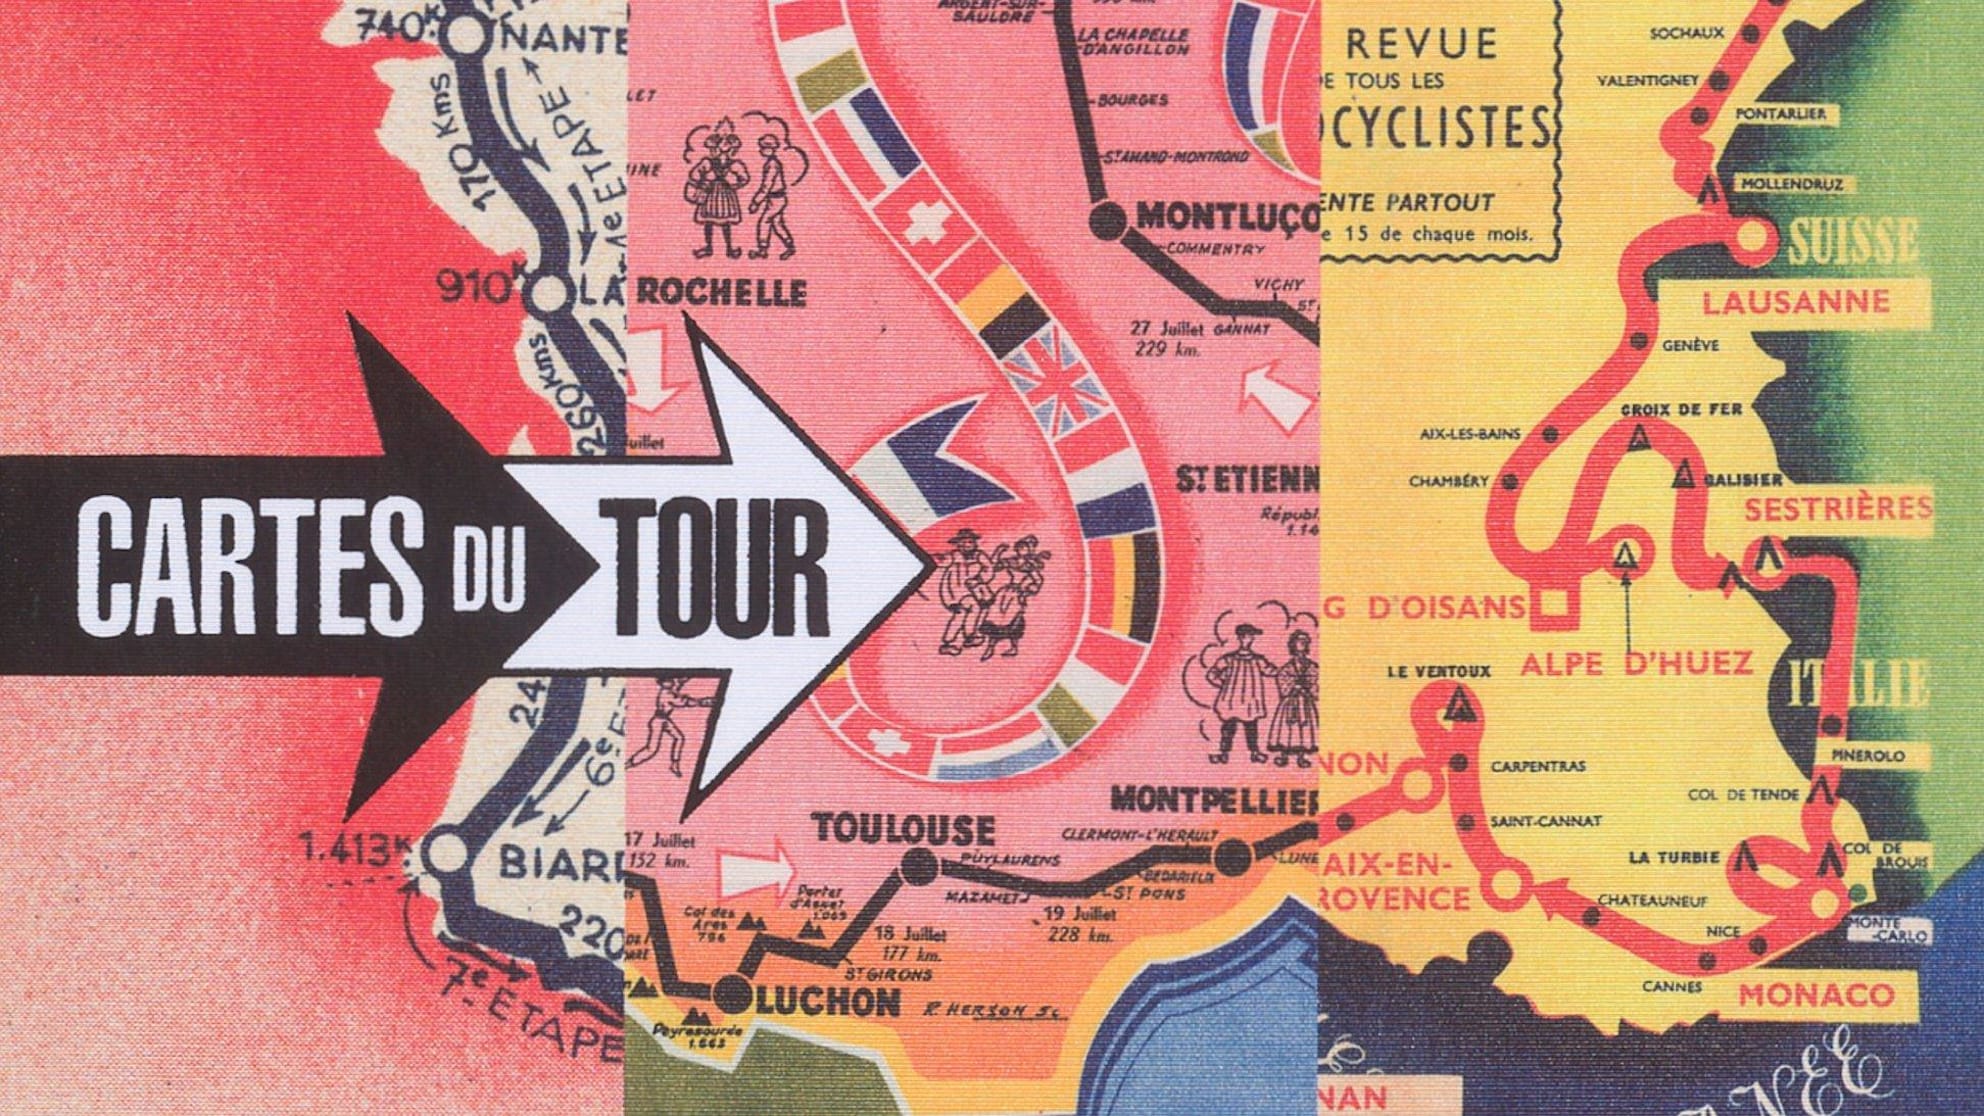 Aside from the iconic leaders’ jerseys worn in the race, the route maps of the Tour de France are perhaps the race’s most recognisable visual representations.